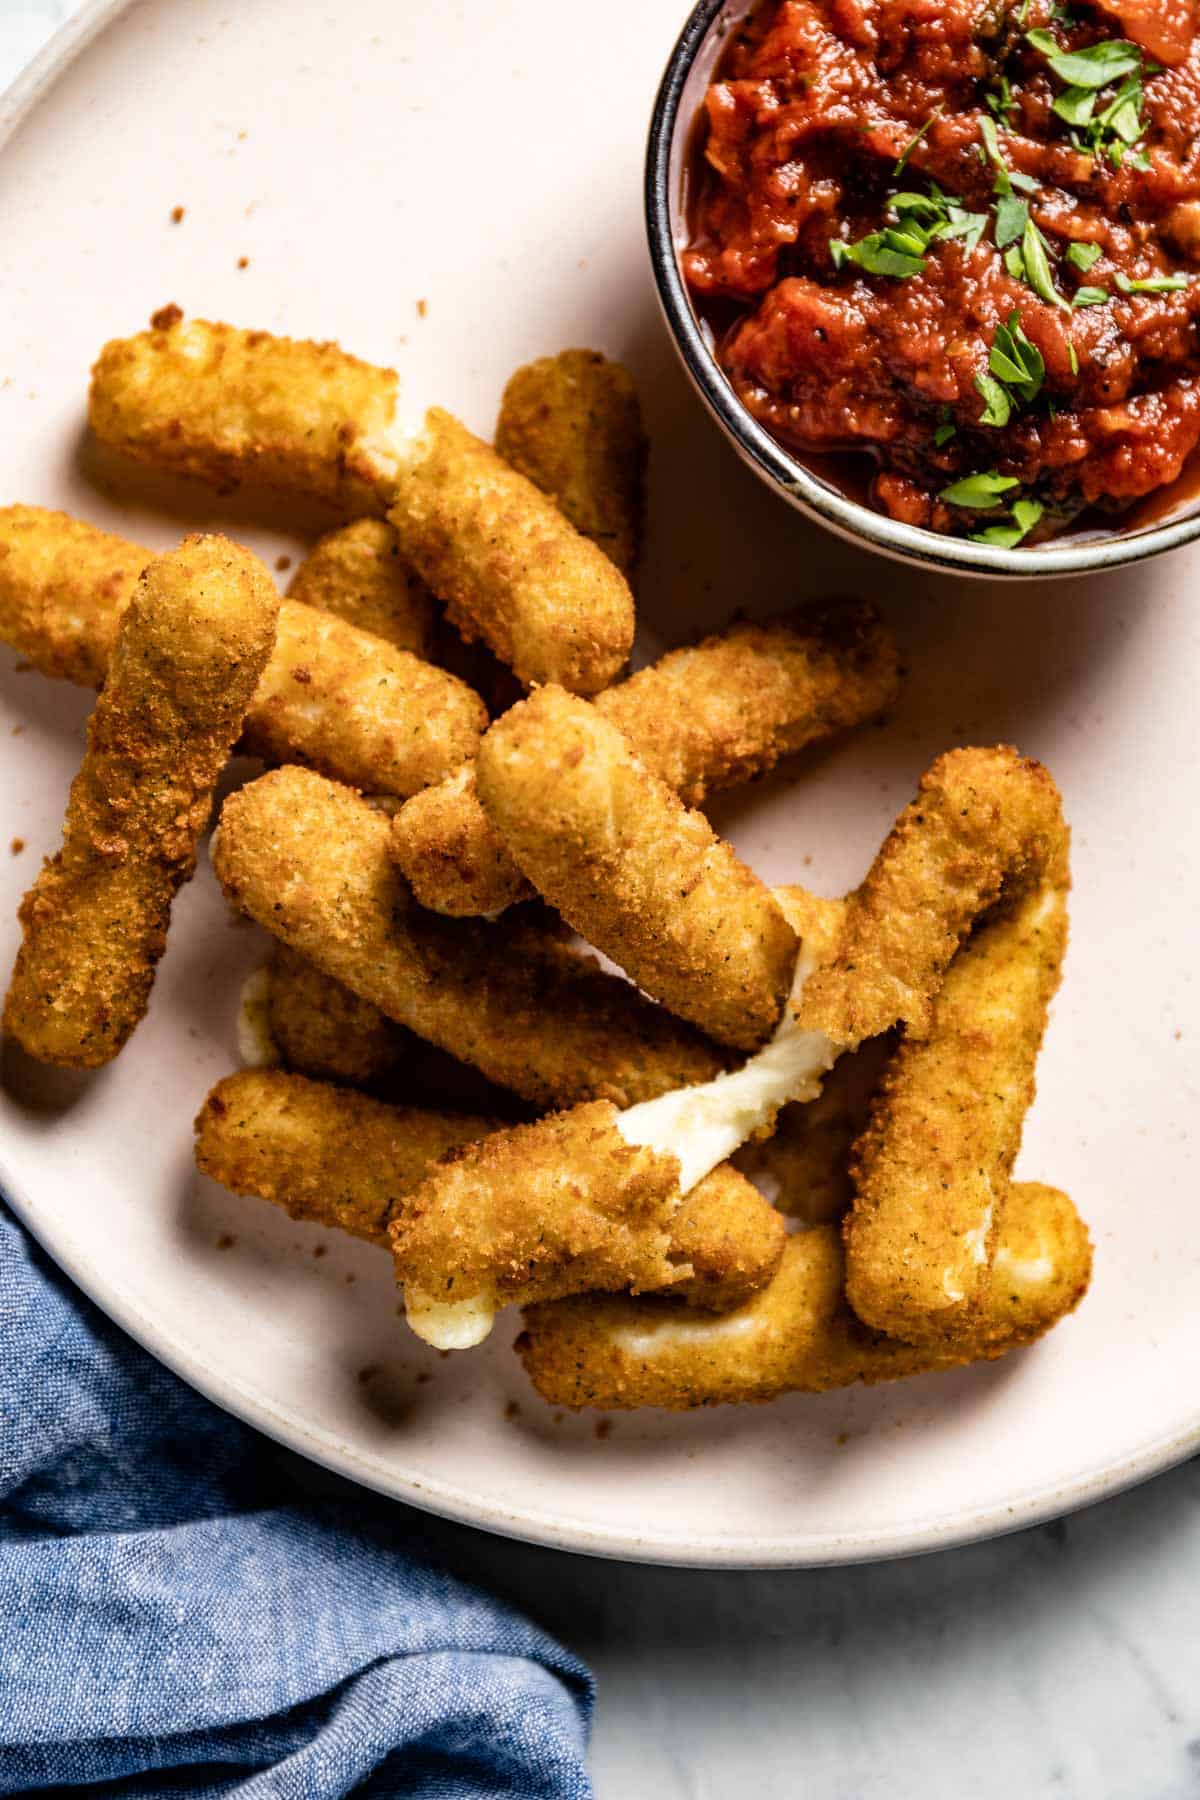 Crispy cheese sticks served on a plate with tomato sauce from the top view.